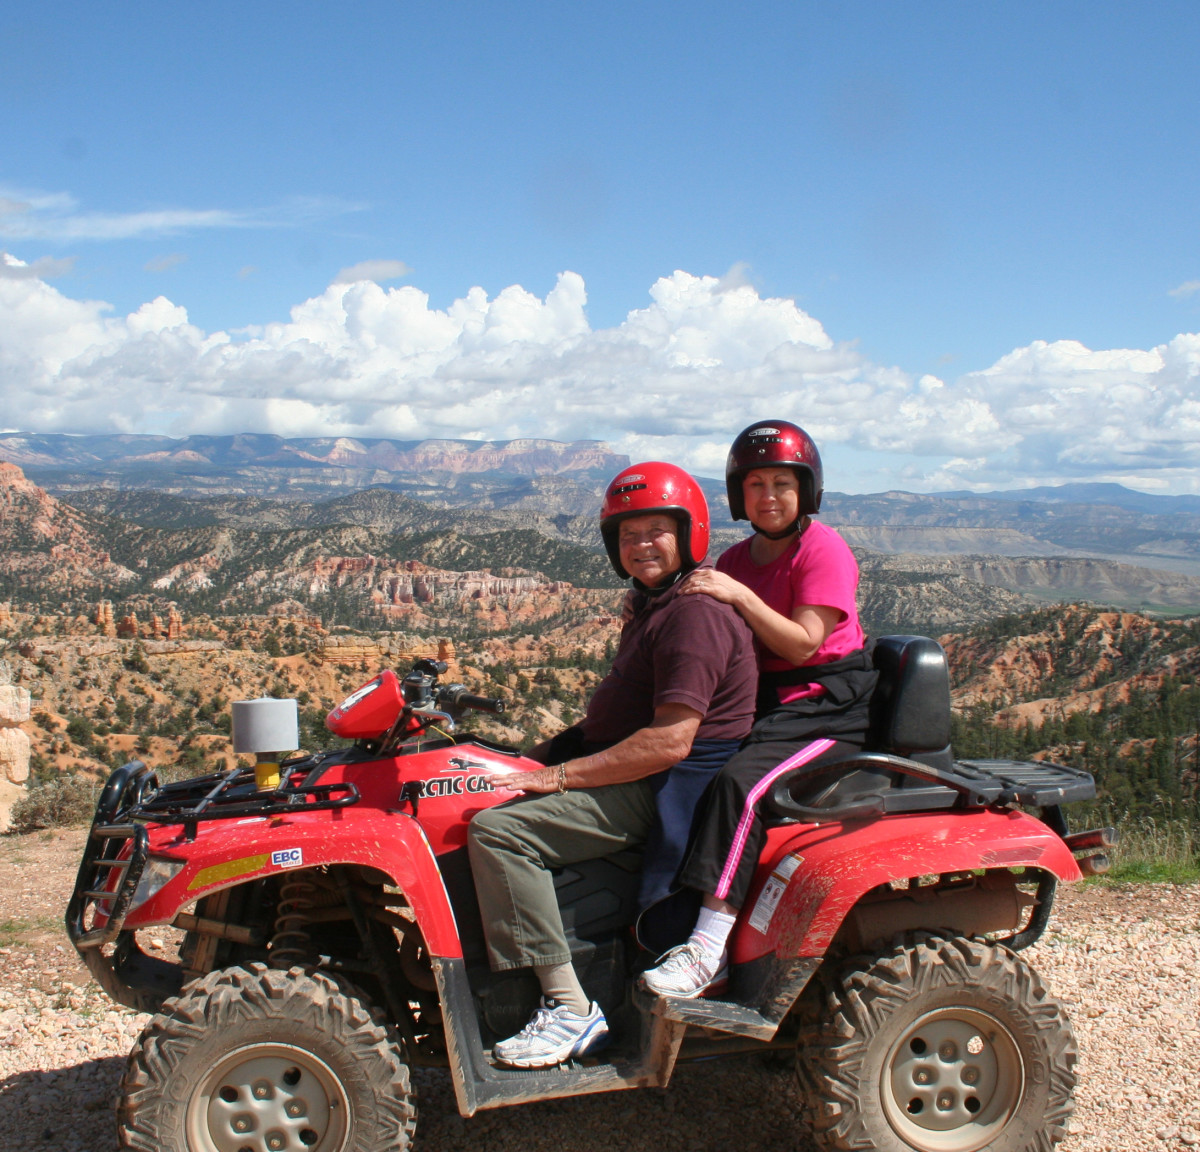 Me and Larry at Bryce Canyon 4-wheeling